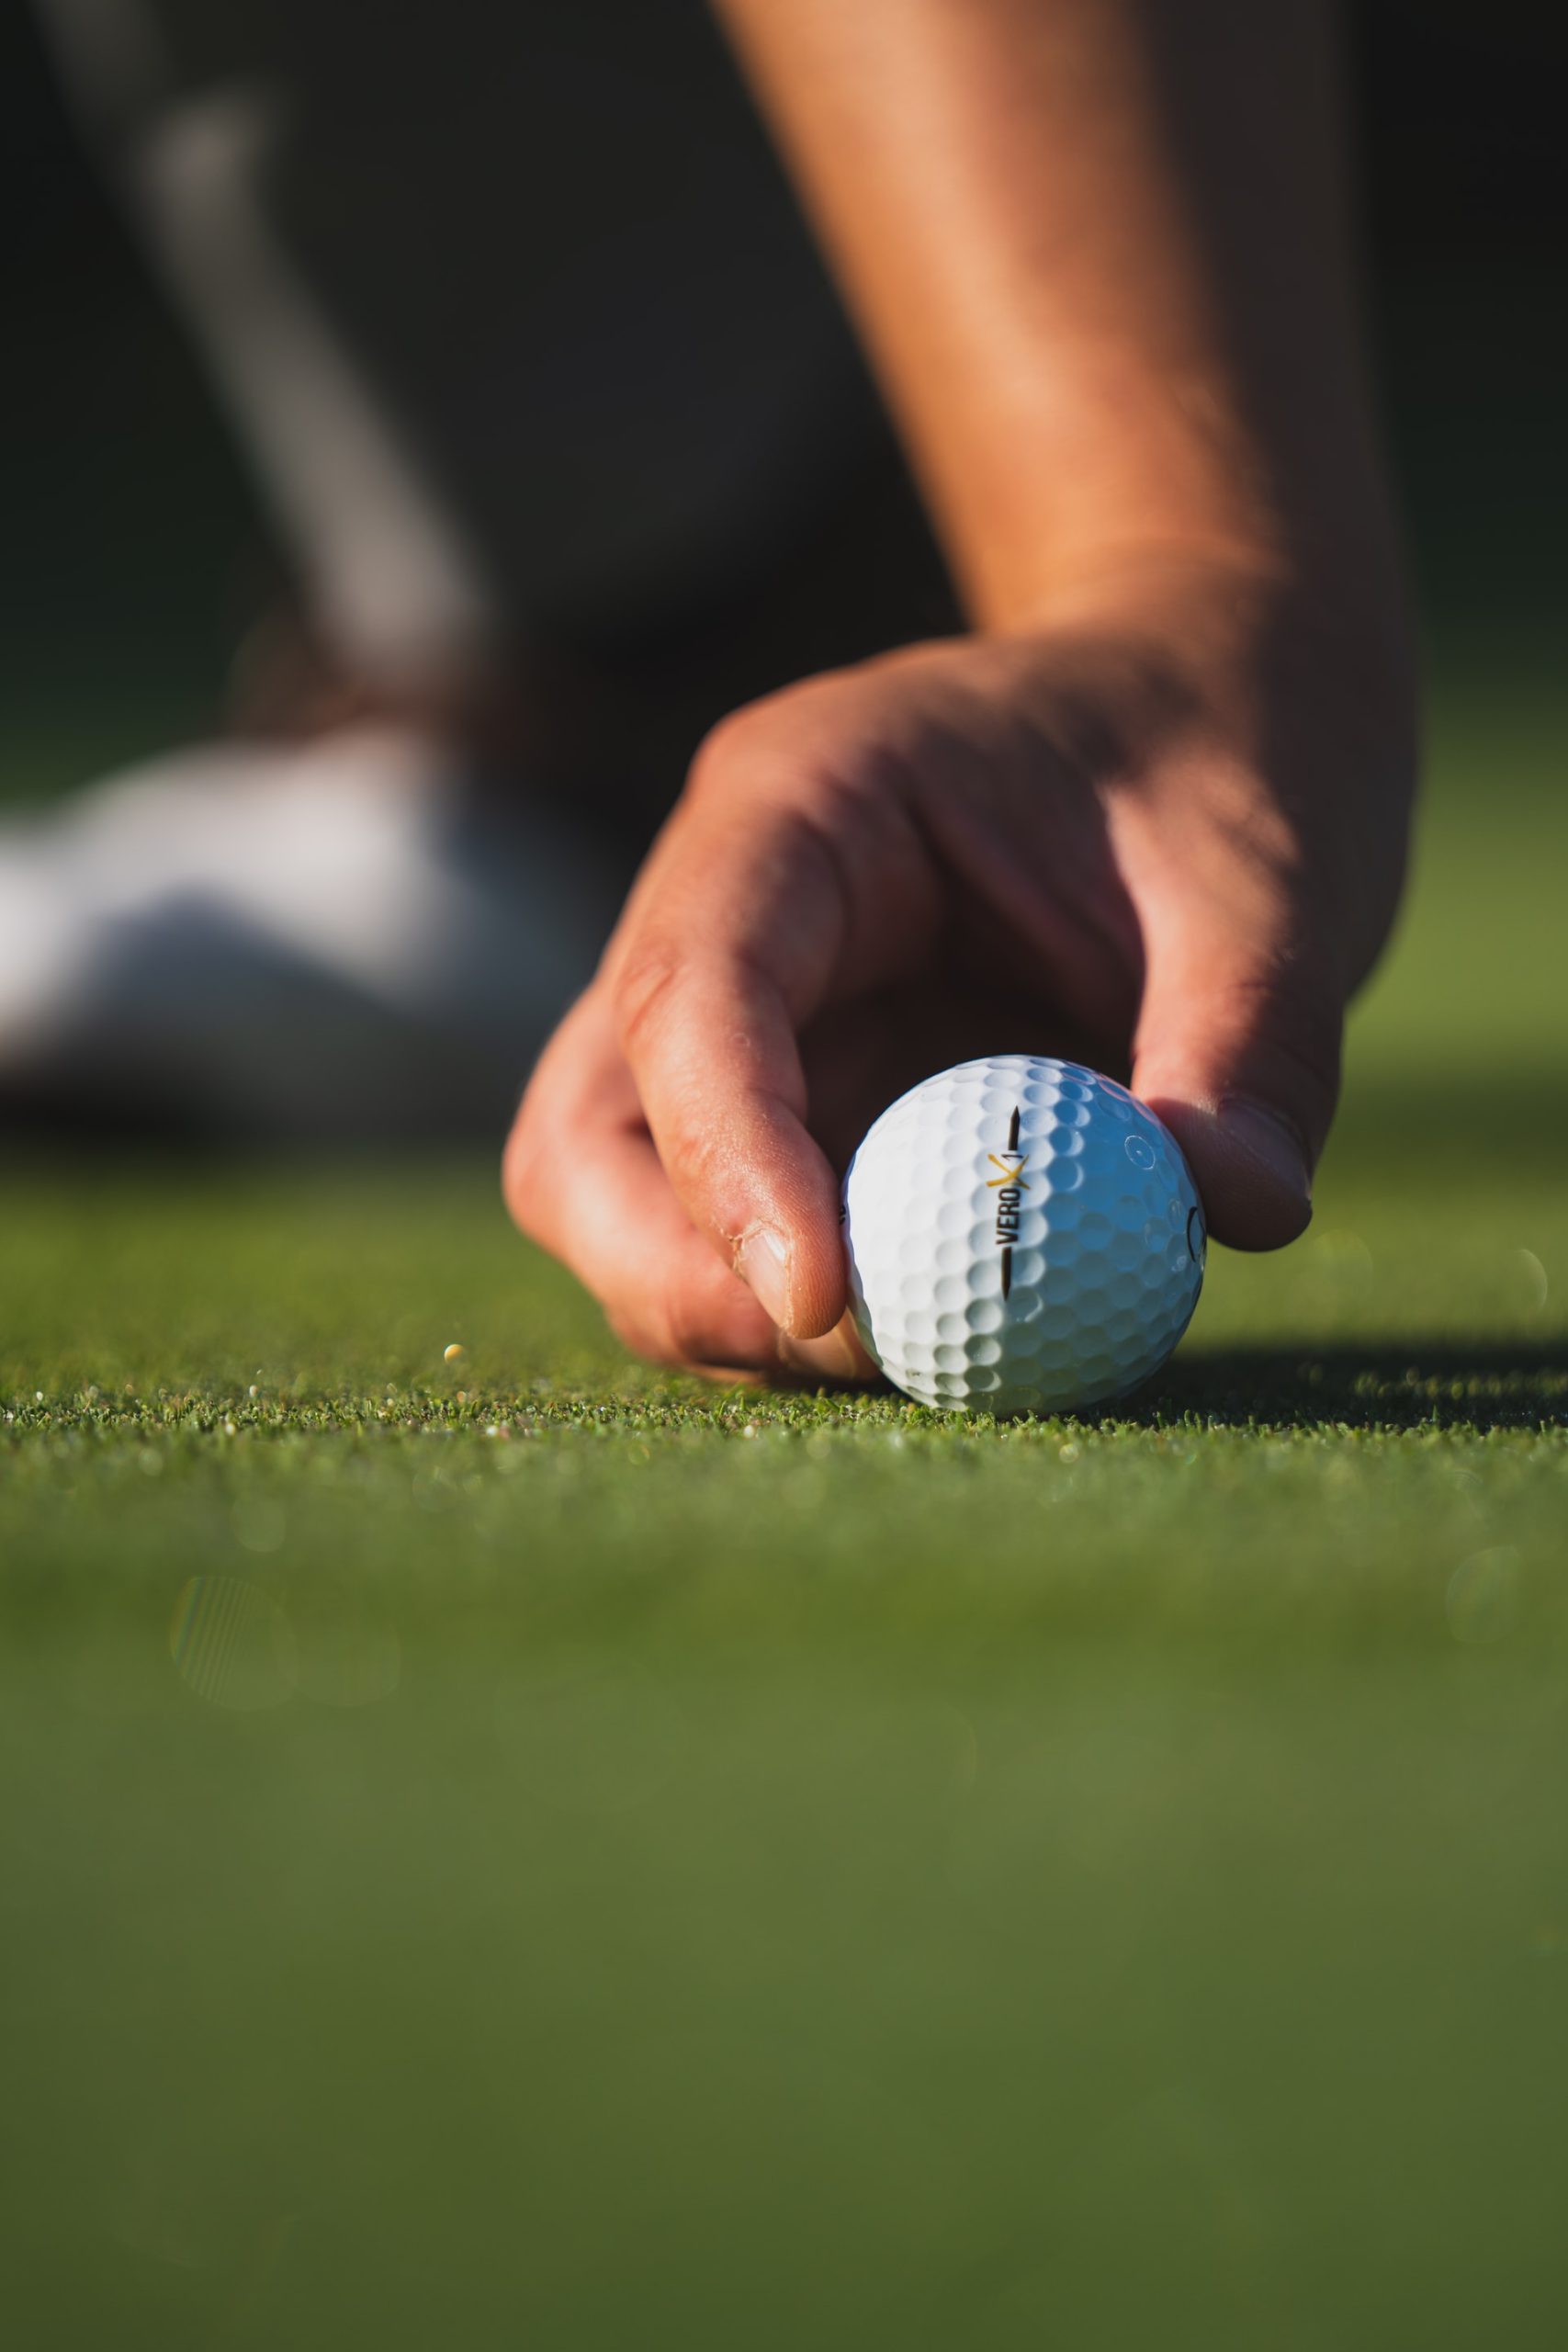 A close up of a hand setting a golf ball on the green.